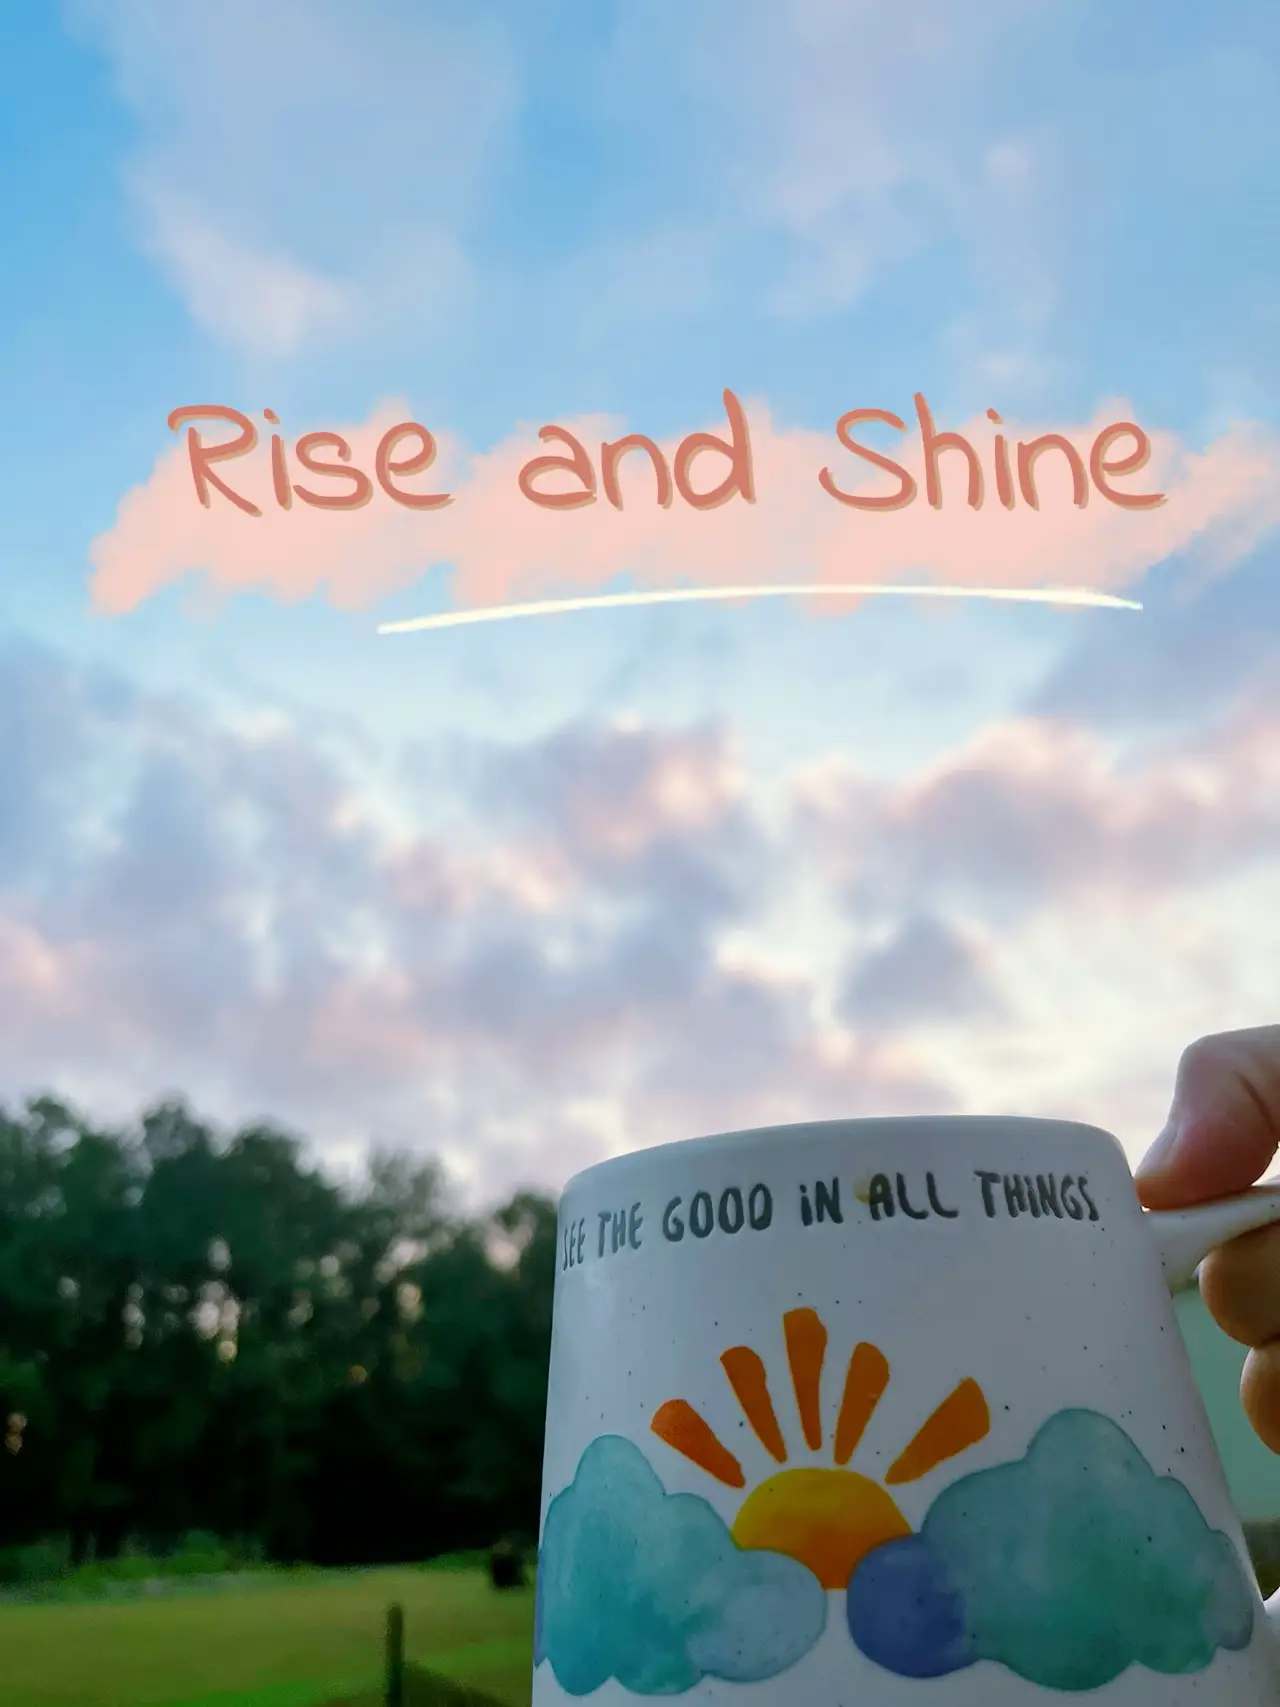 ✨ Rise and shine! 🌞 There's nothing better than starting the day with